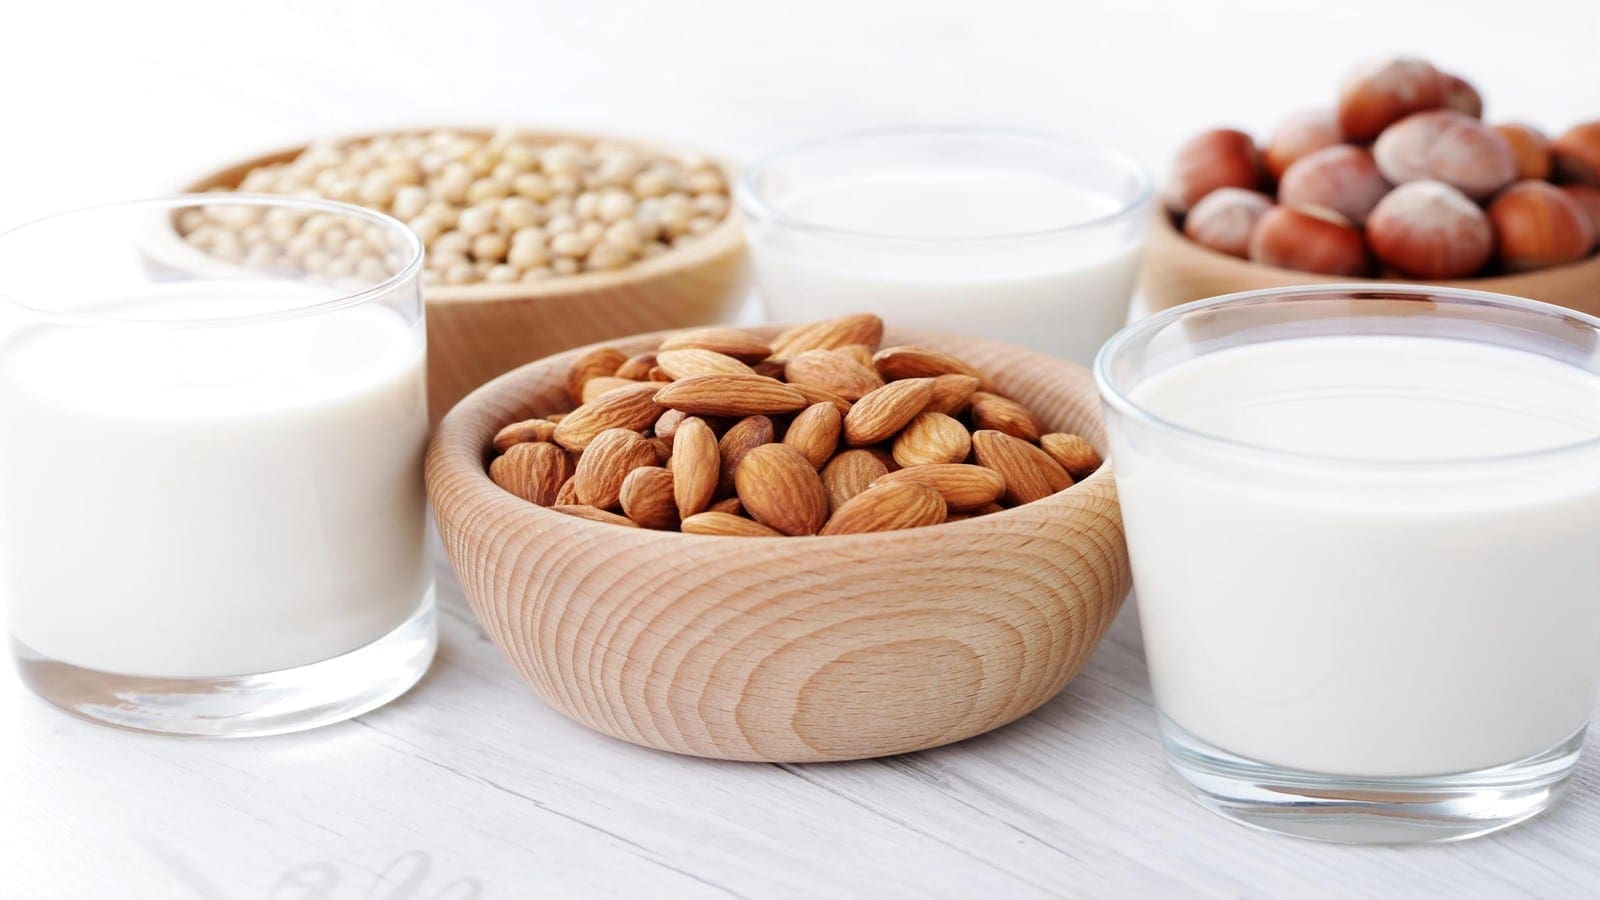 Research finds plant-based milk lower in nutrition compared to conventional milk